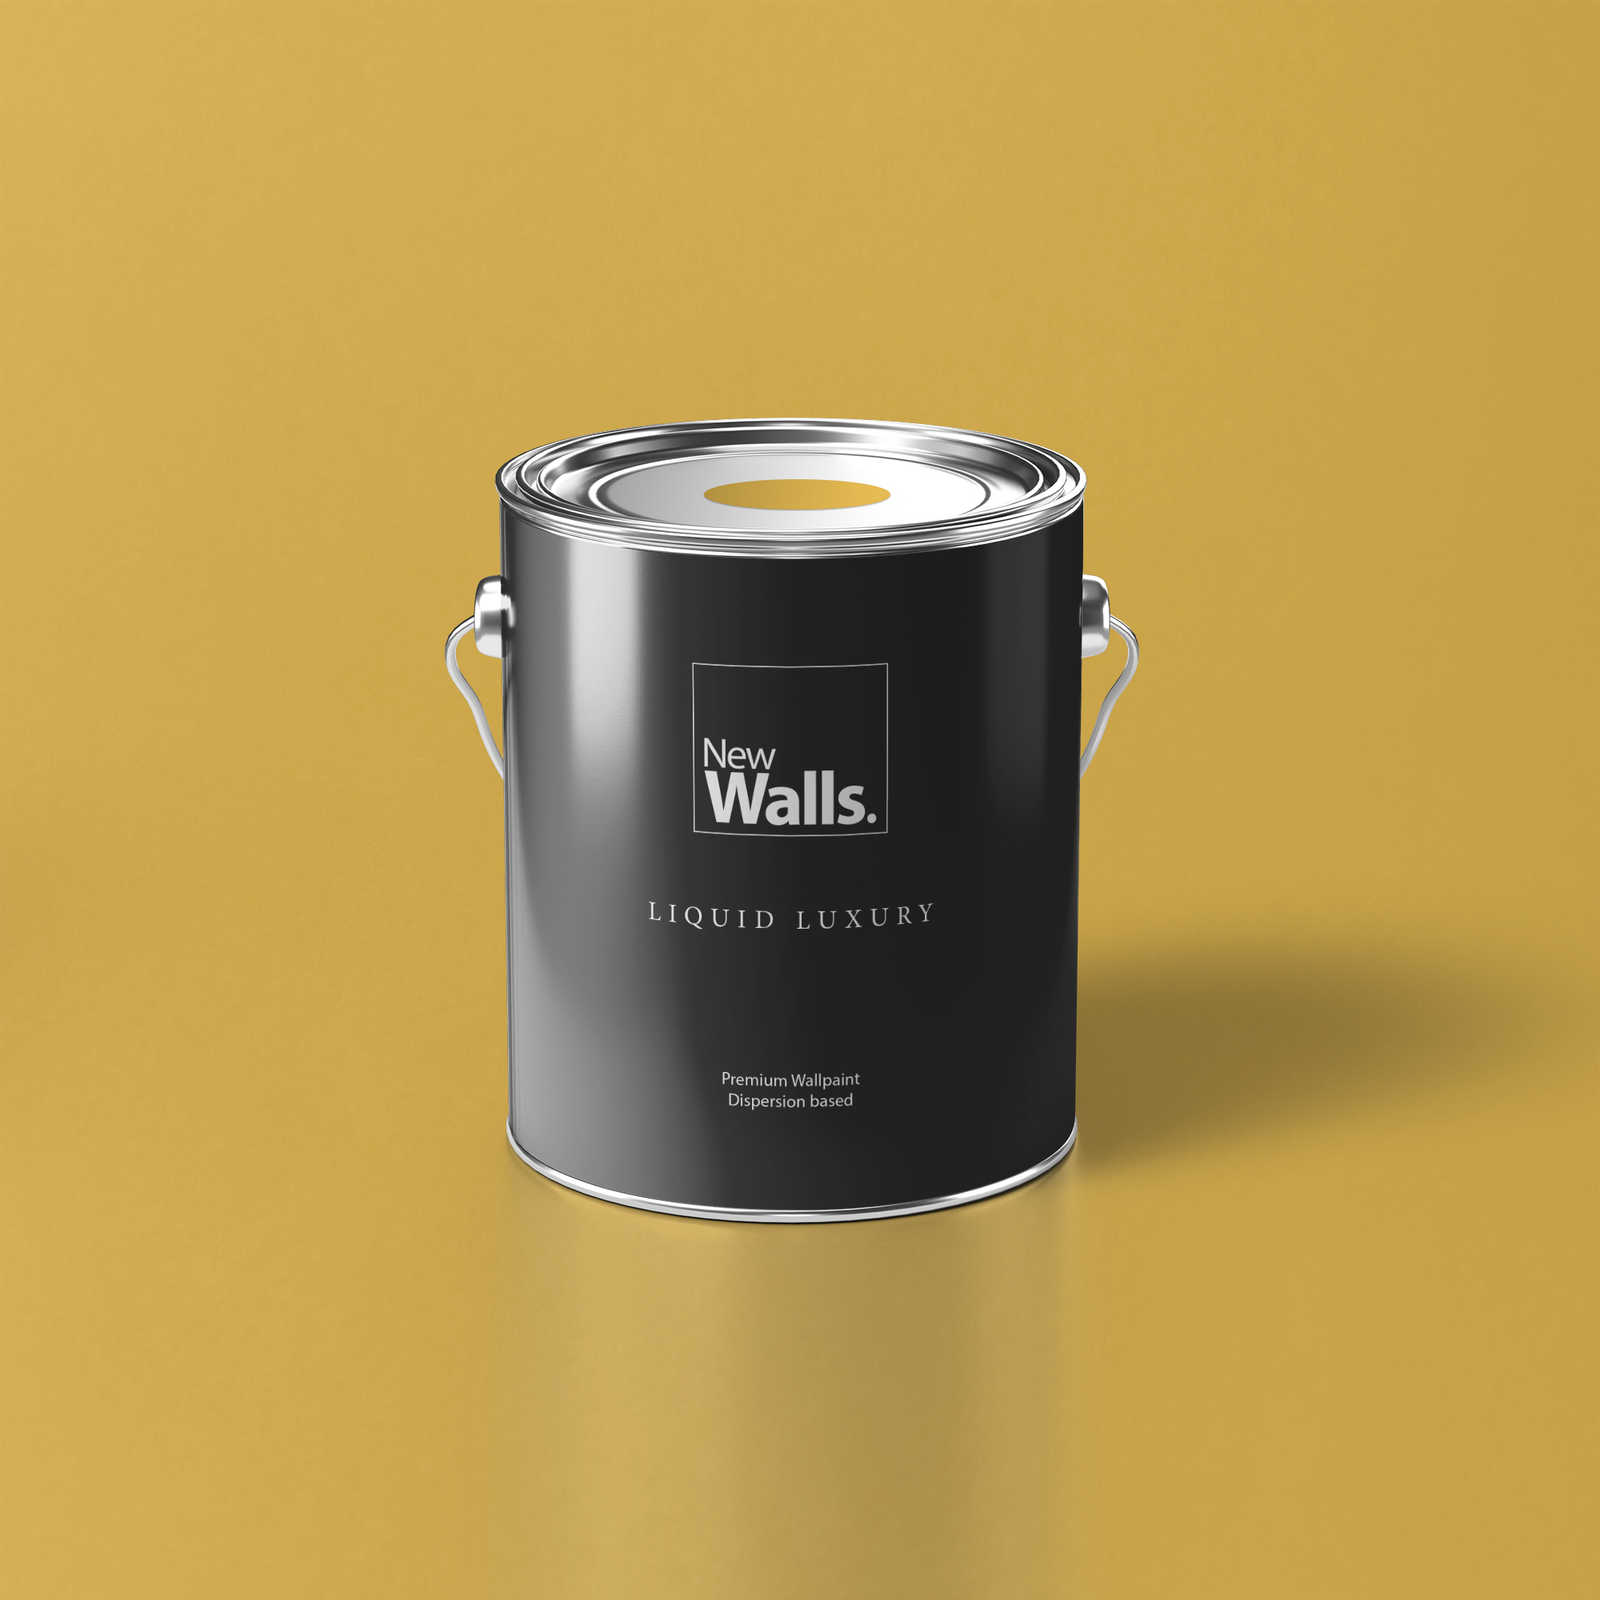 Premium Wall Paint Radiant Mustard Yellow »Juicy Yellow« NW802 – 5 litre
